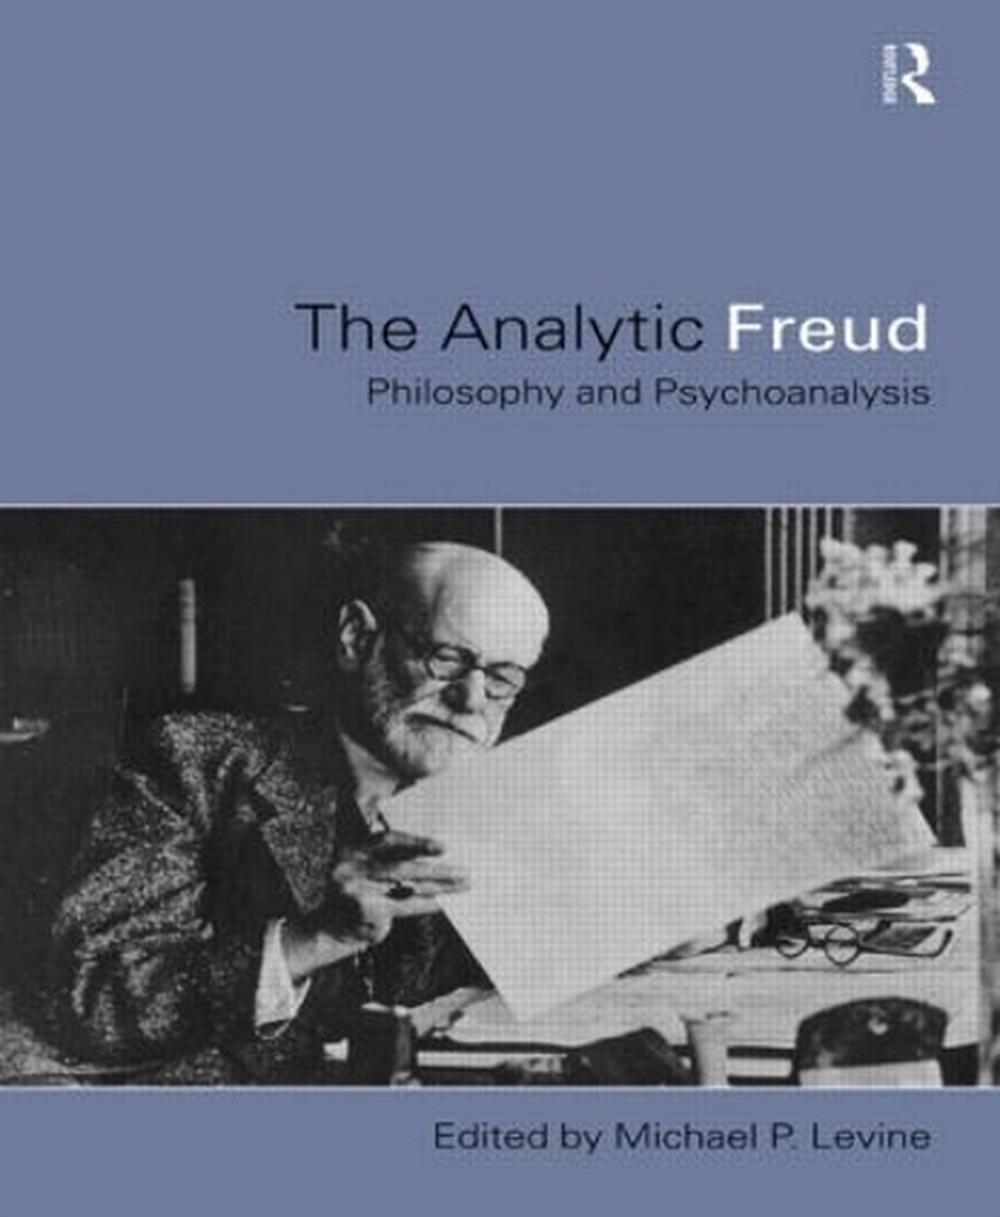 Analytic Freud: Philosophy and Psychoanalysis by Michael P. Levine ...